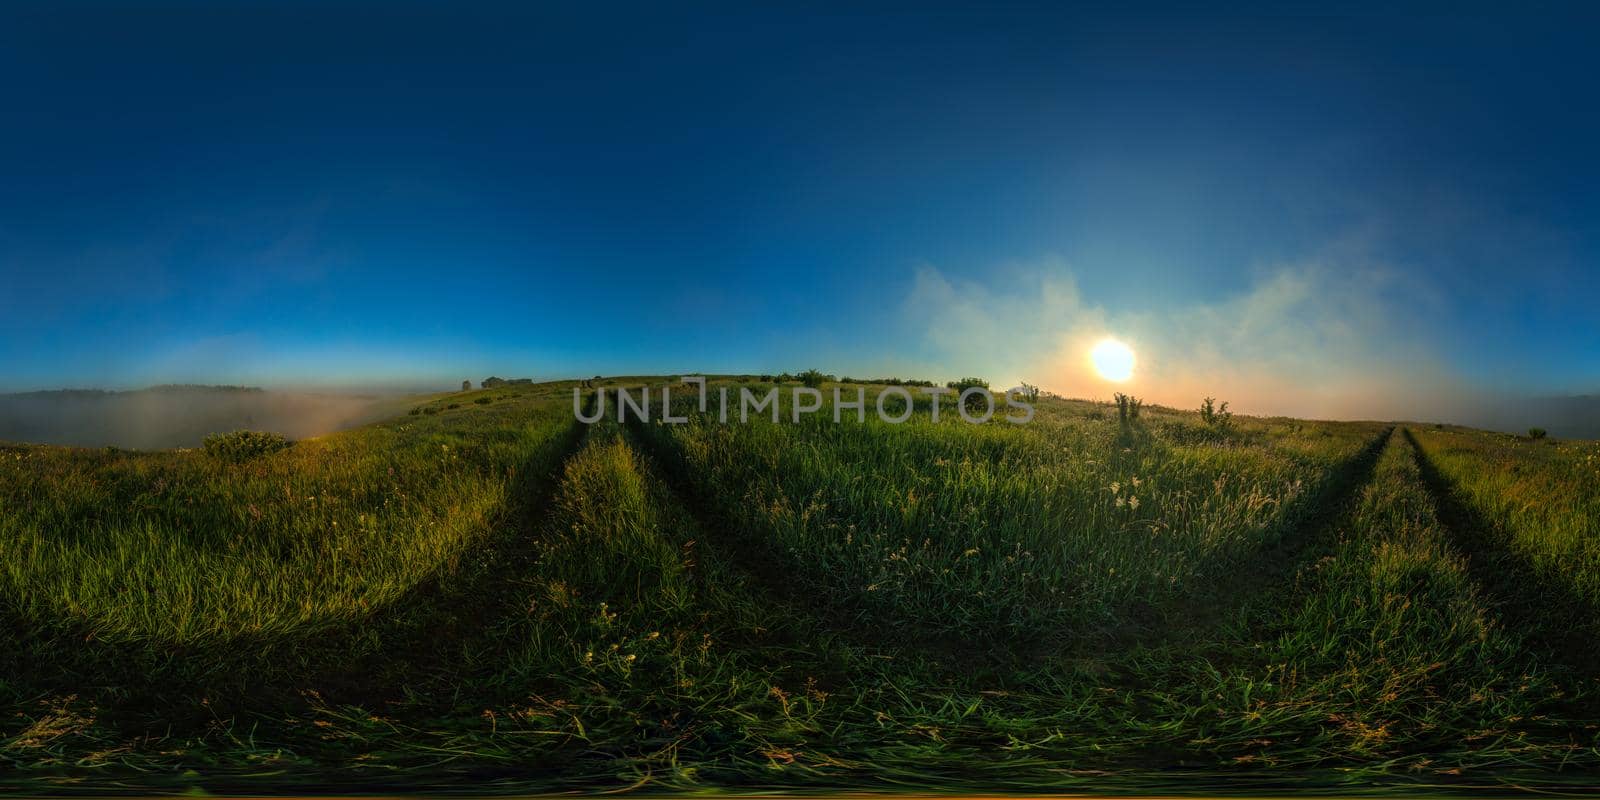 360 degree spherical panorama of misty summer morning meadow in eqirectangular projection by z1b